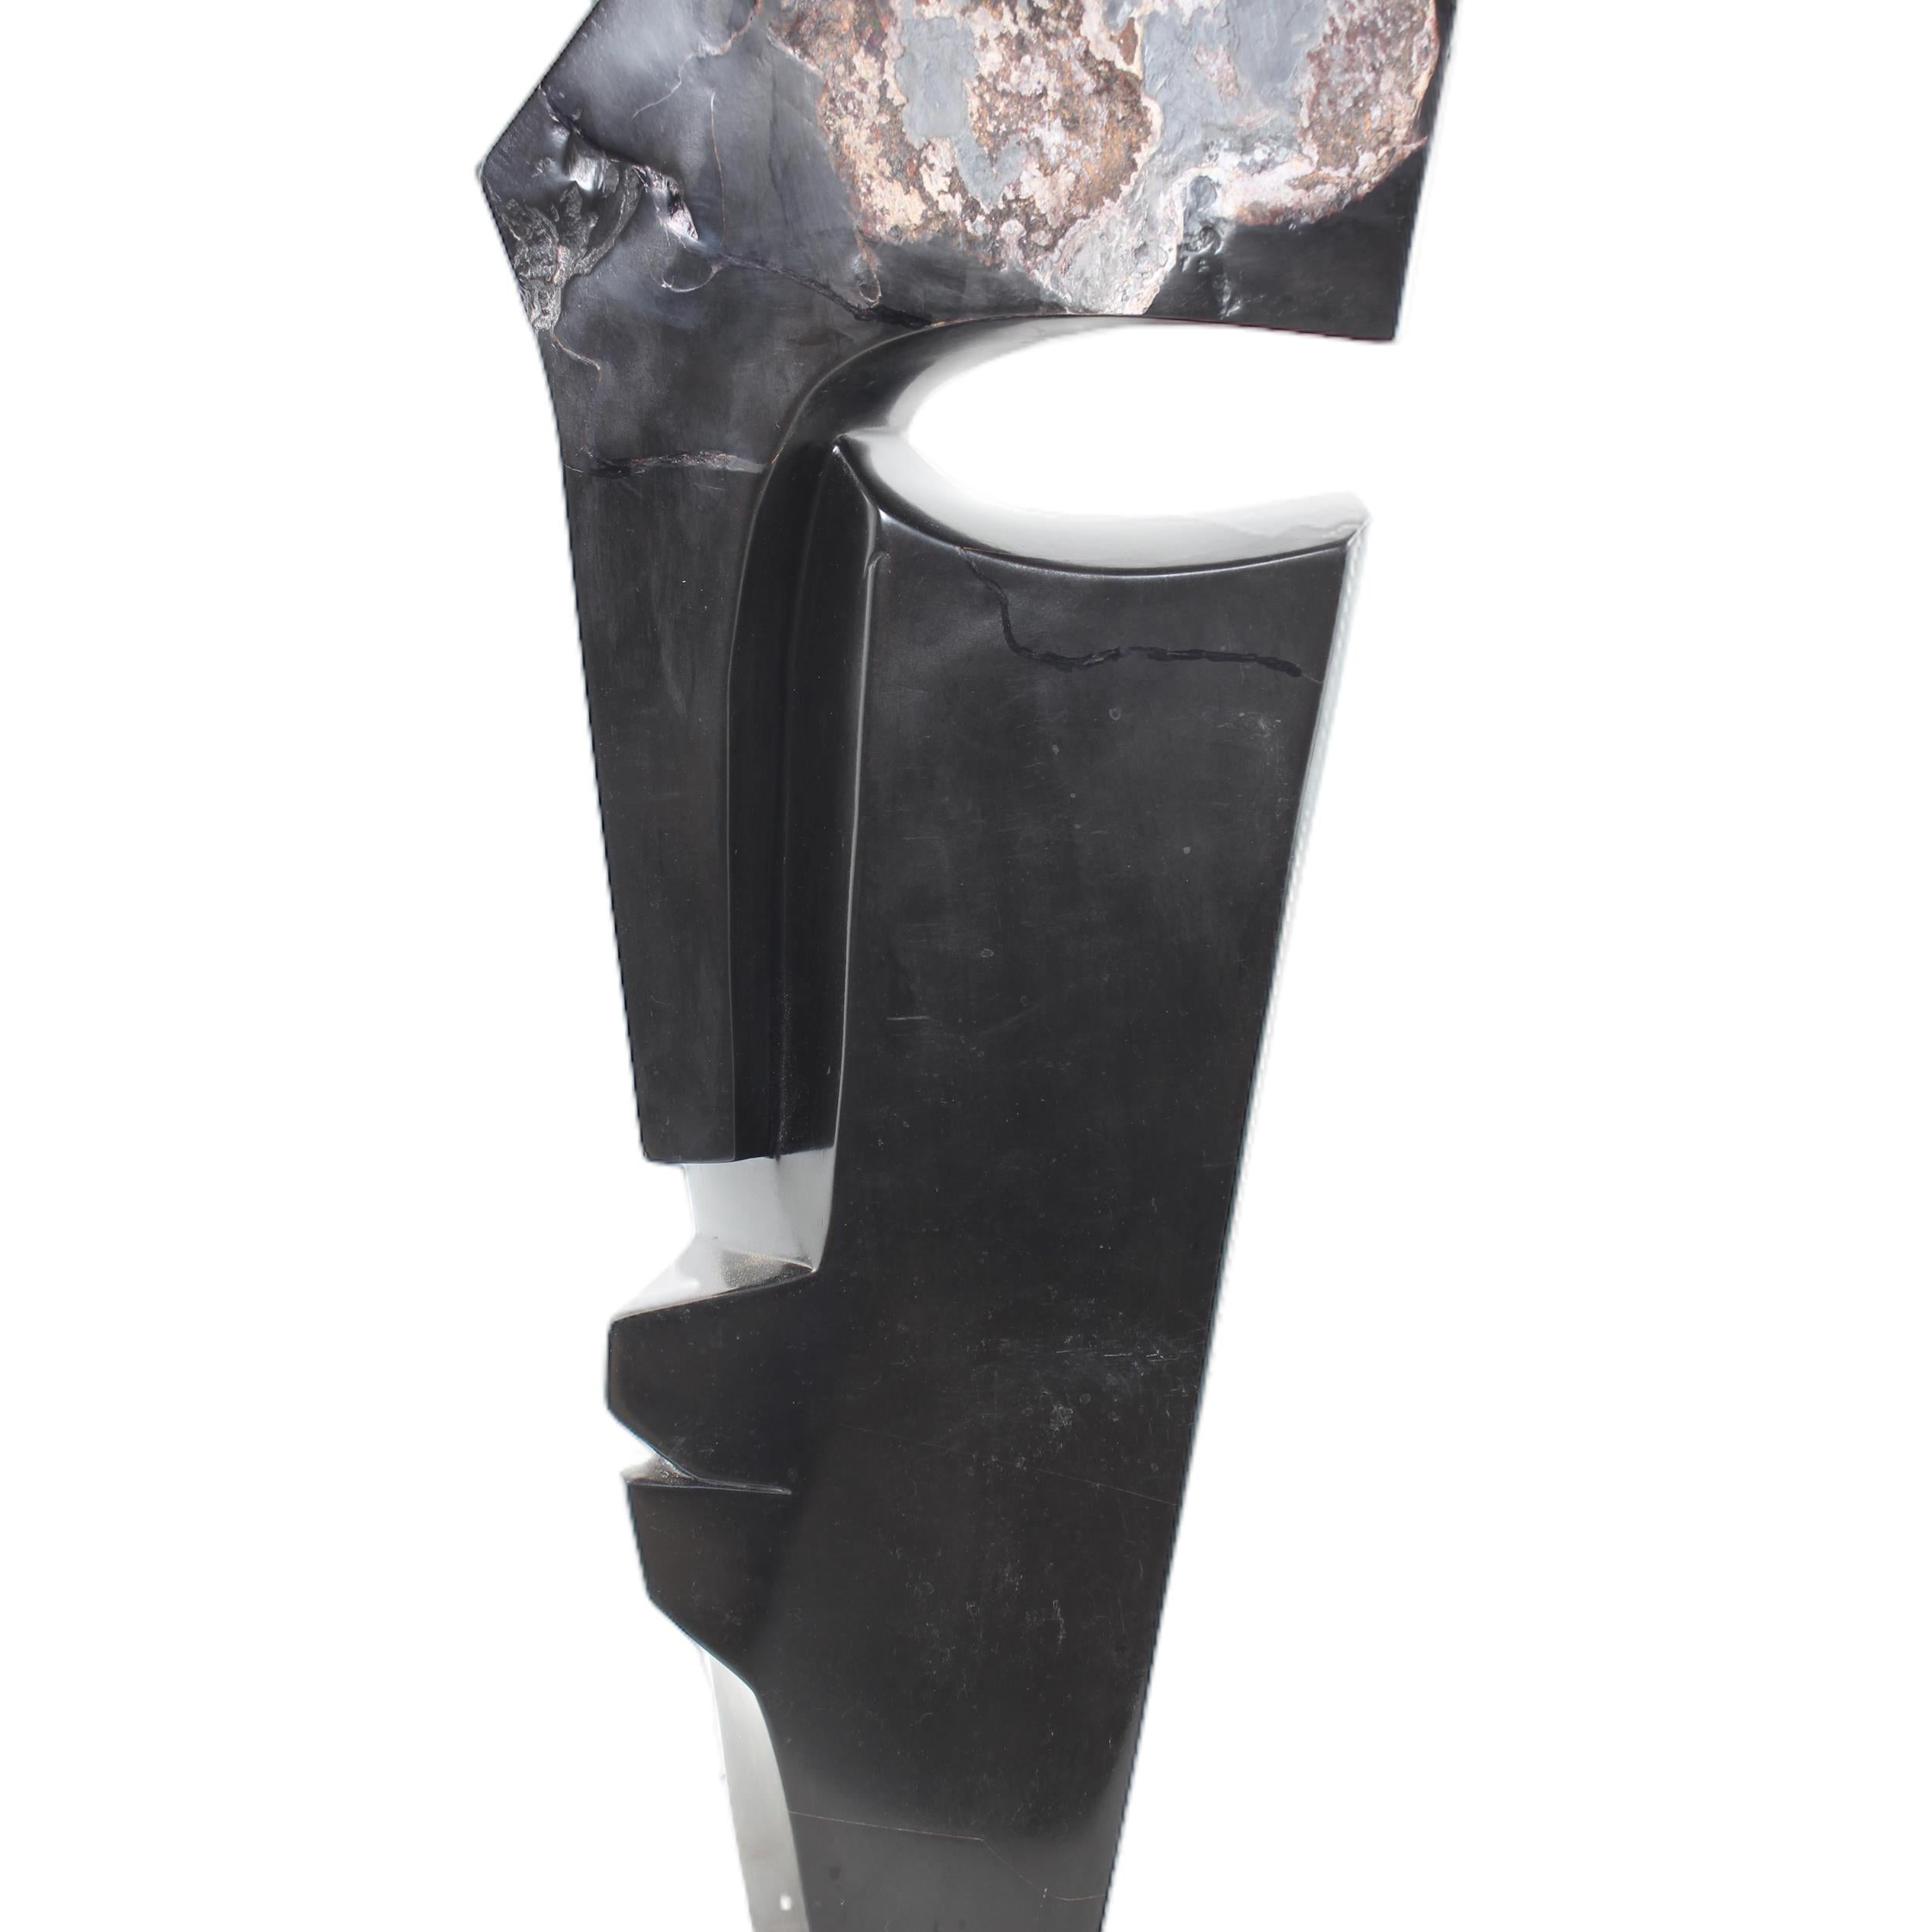 Shona Tribe Wonderstone (Pyrophyllite) Cubic Faces (Contemporary) ~31.1" Tall